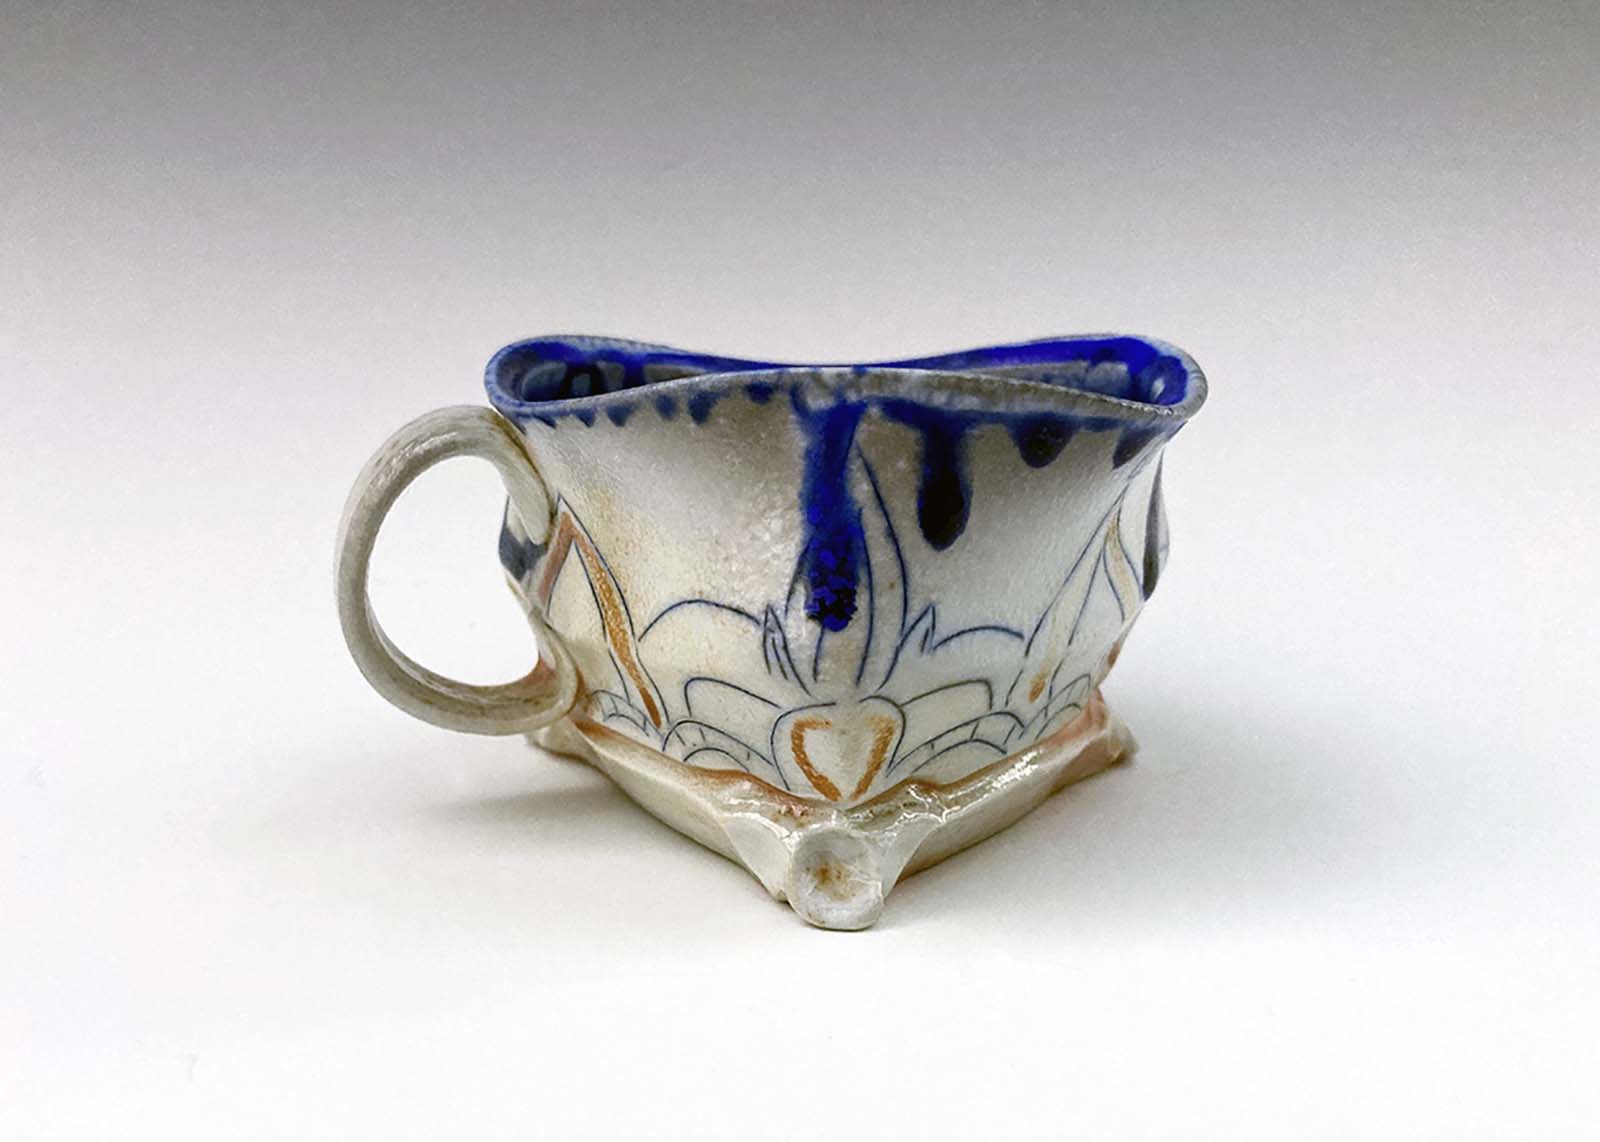 Katy Ostronic, Lotus mug, 5 in. (13 cm) in height, porcelain, wood and soda ﬁred, 2021.